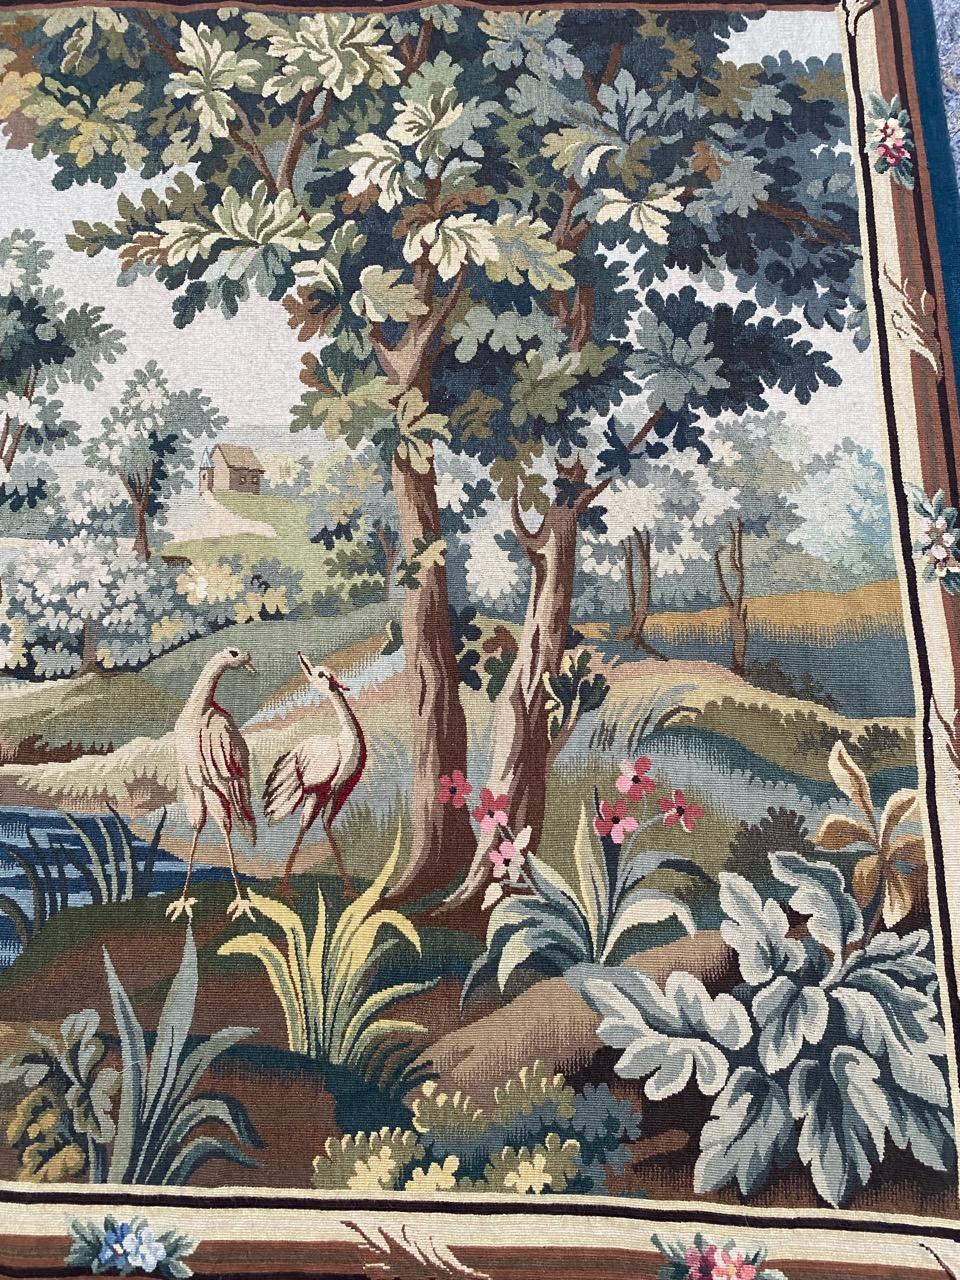 Very pretty mid century French Aubusson tapestry with a garden design with birds, and beautiful colors, entirely hand woven with wool and silk.

✨✨✨
